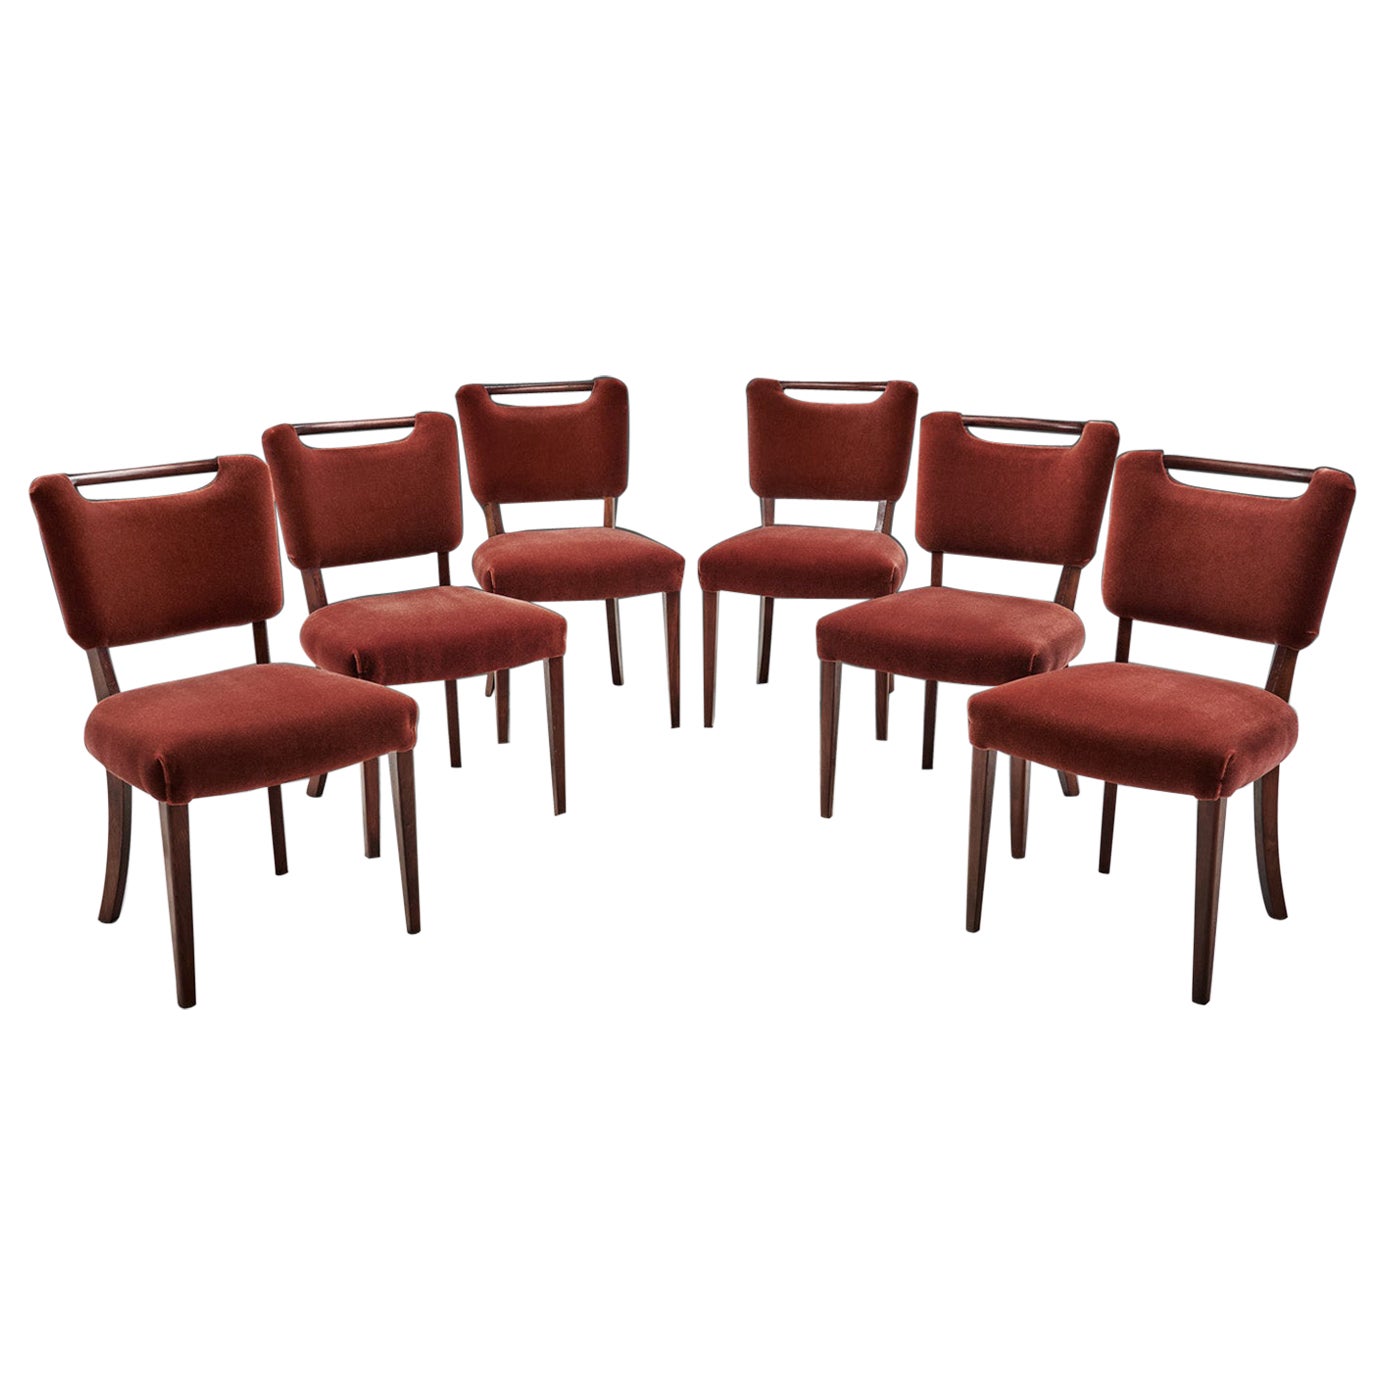 Set of Six Upholstered Dining Chairs by a European Cabinetmaker, Europe ca 1950s For Sale